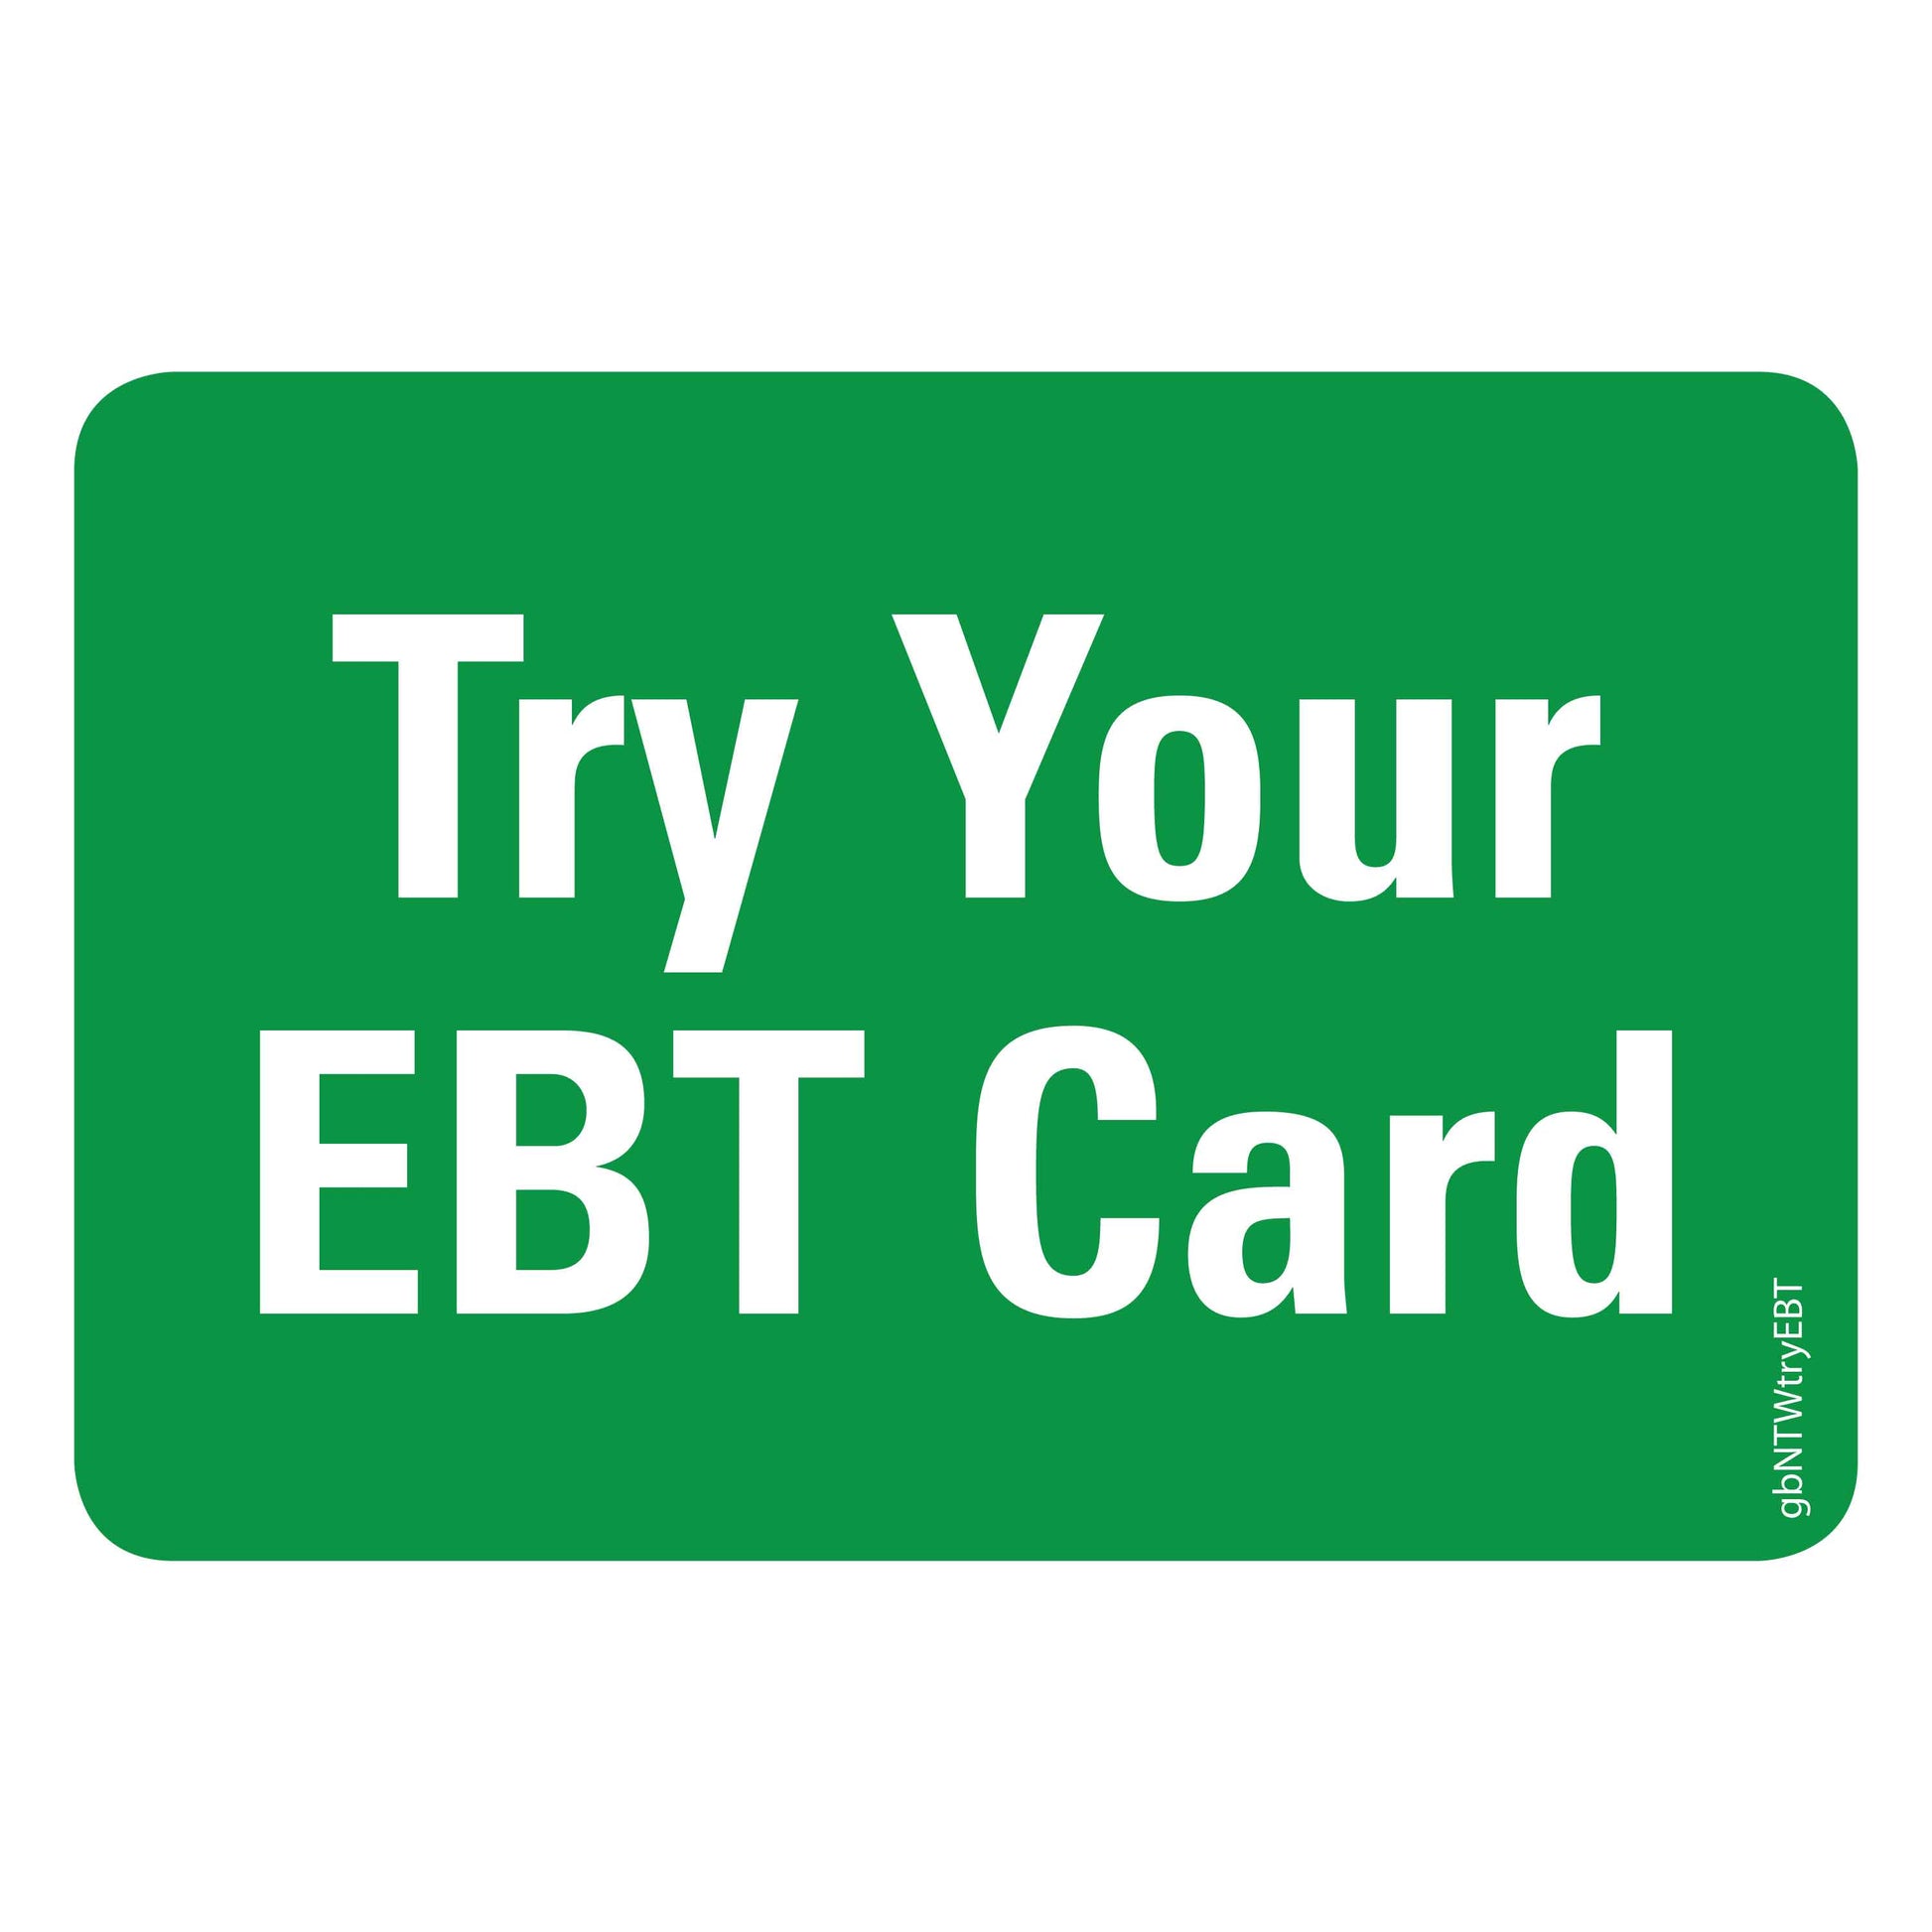 Try Your EBT Card Decal